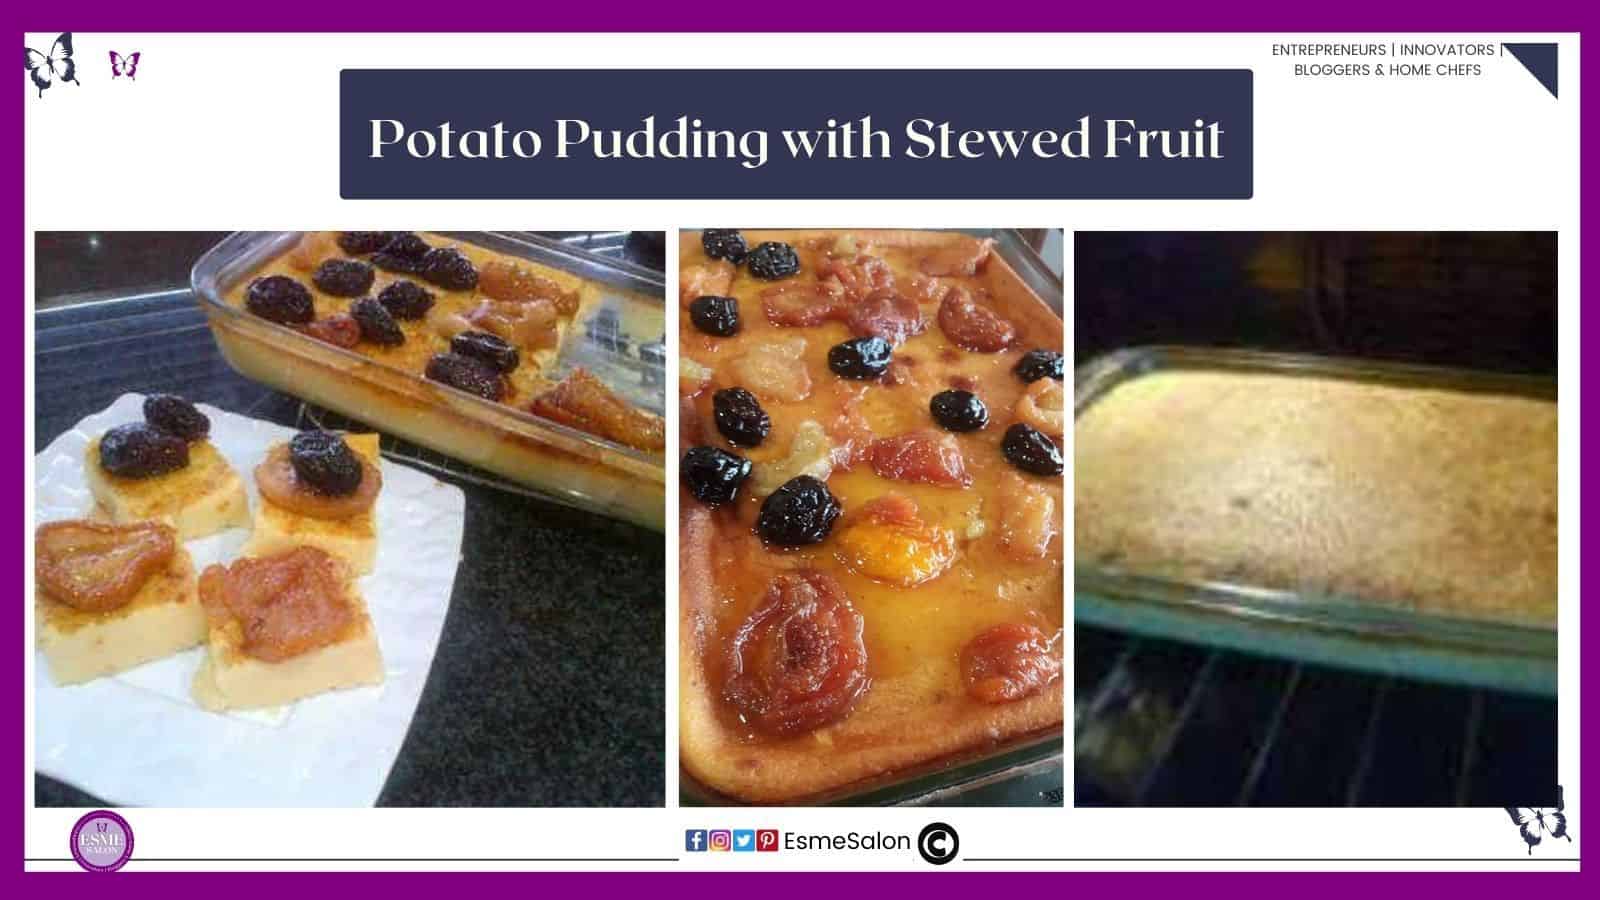 an image of a Potato Pudding and topped with Stewed Fruit